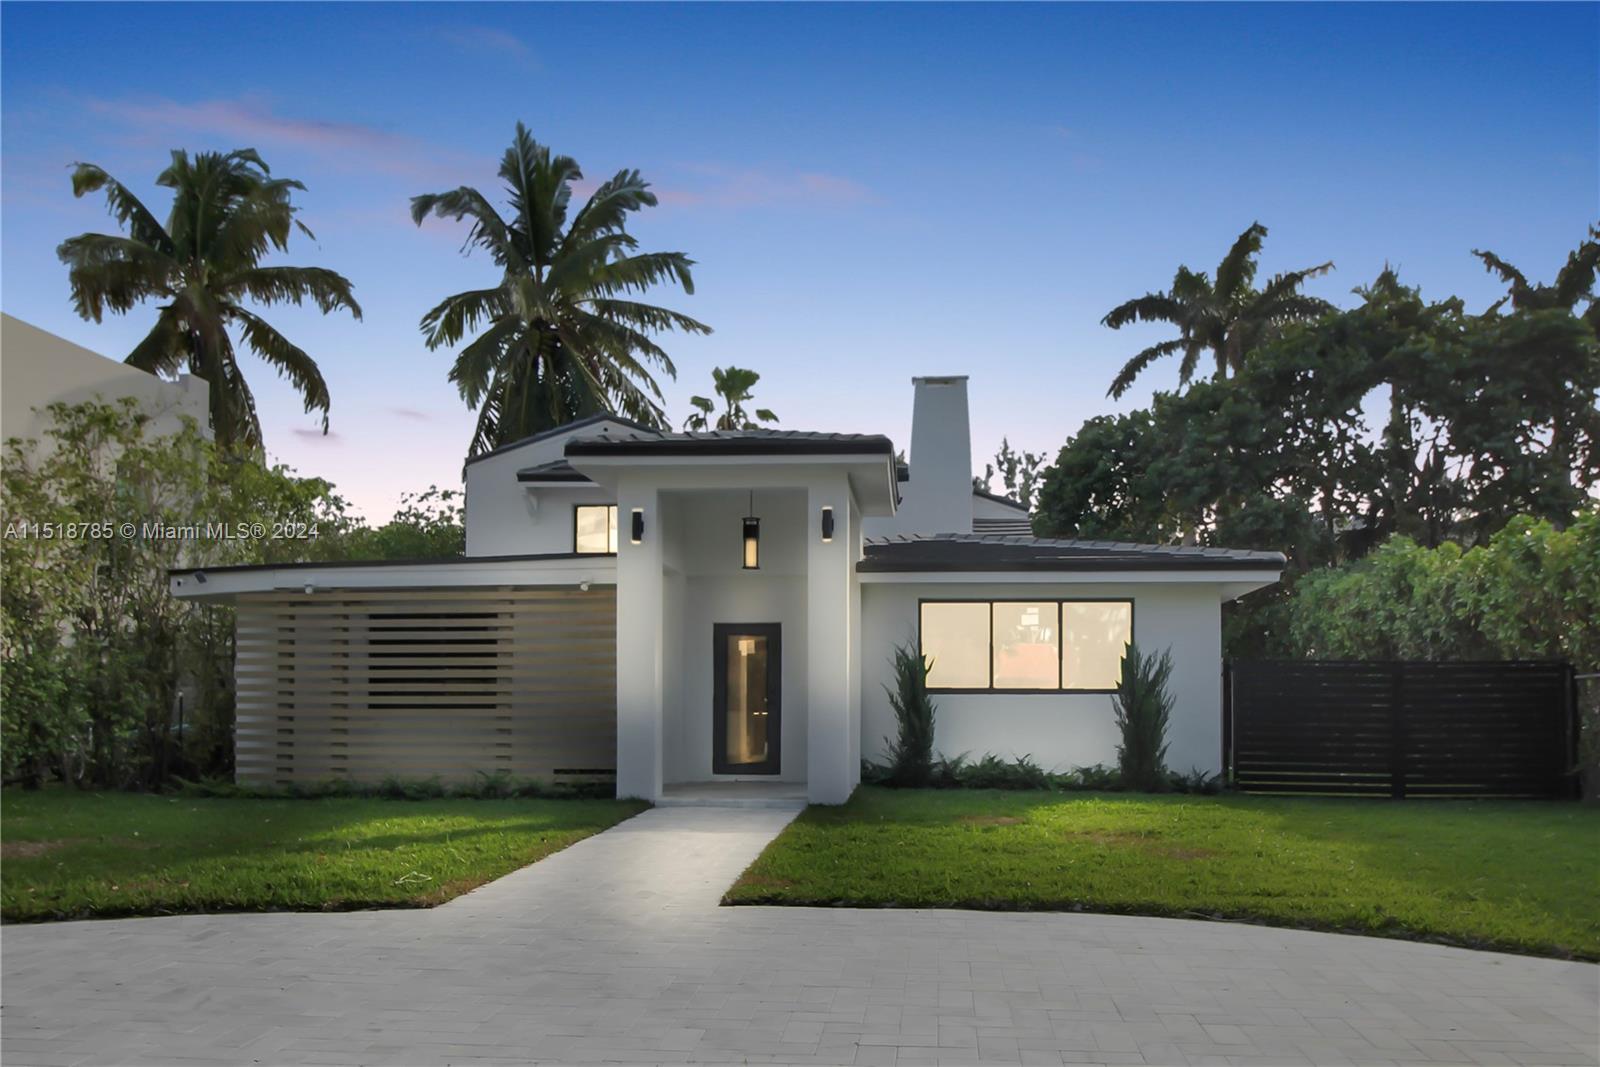 This modern home in Nautilus offers an estate privacy fence, marble drive way with multi-car parking, marble patio, putting green, new sod, and so much more.  Pool permit submitted.